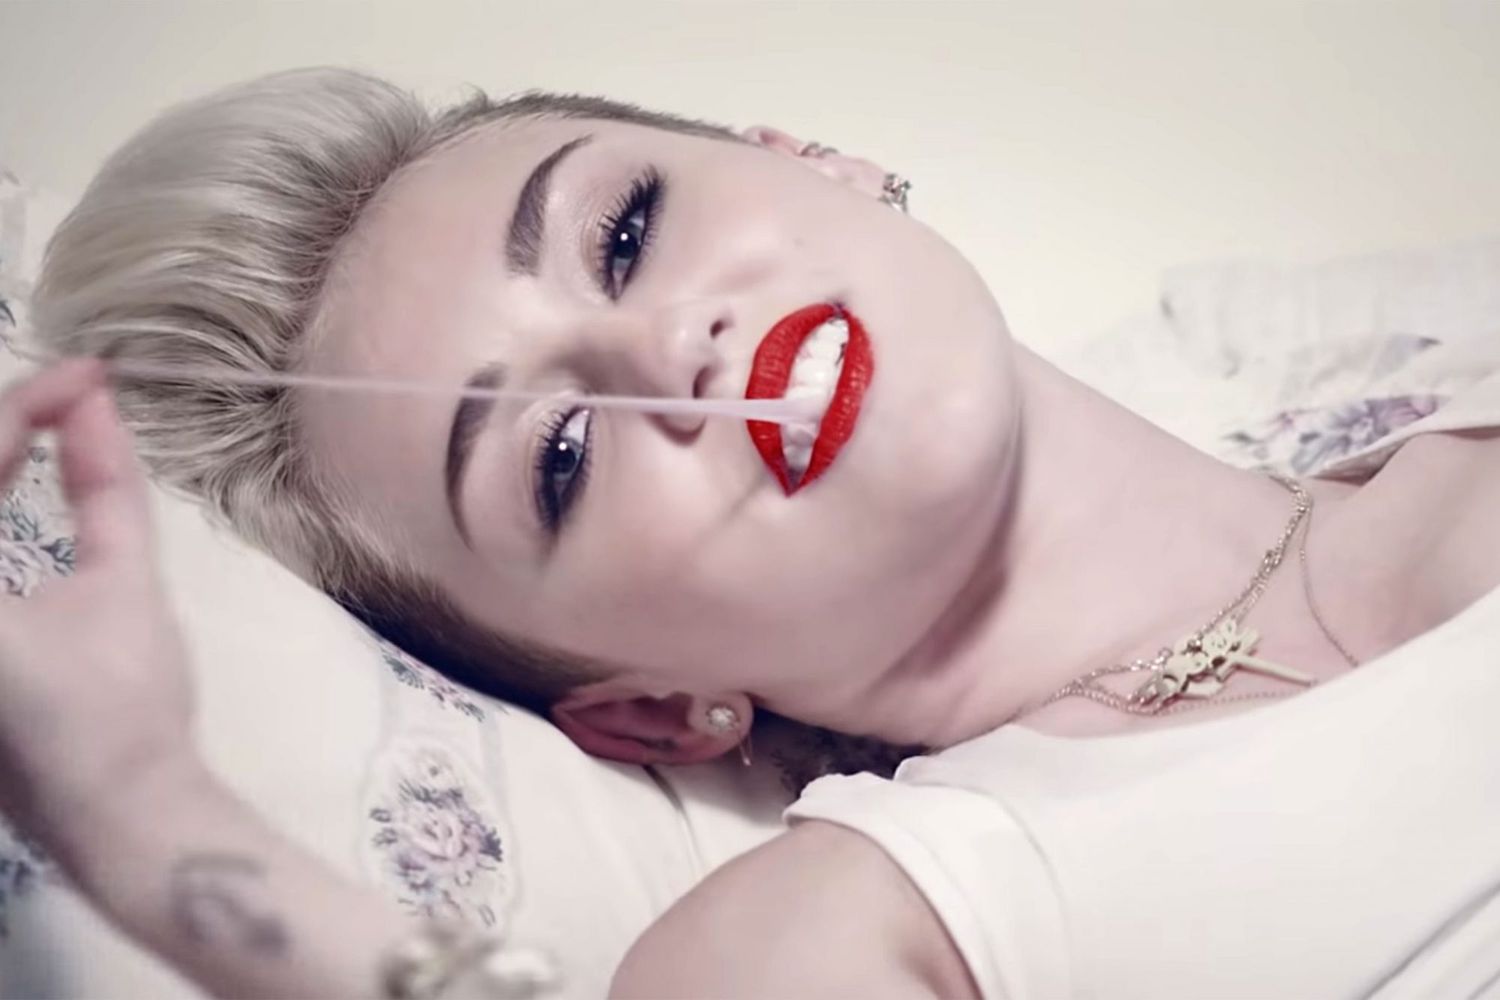 &ldquo;We Can&rsquo;t Stop&rdquo; by Miley Cyrus&nbsp;